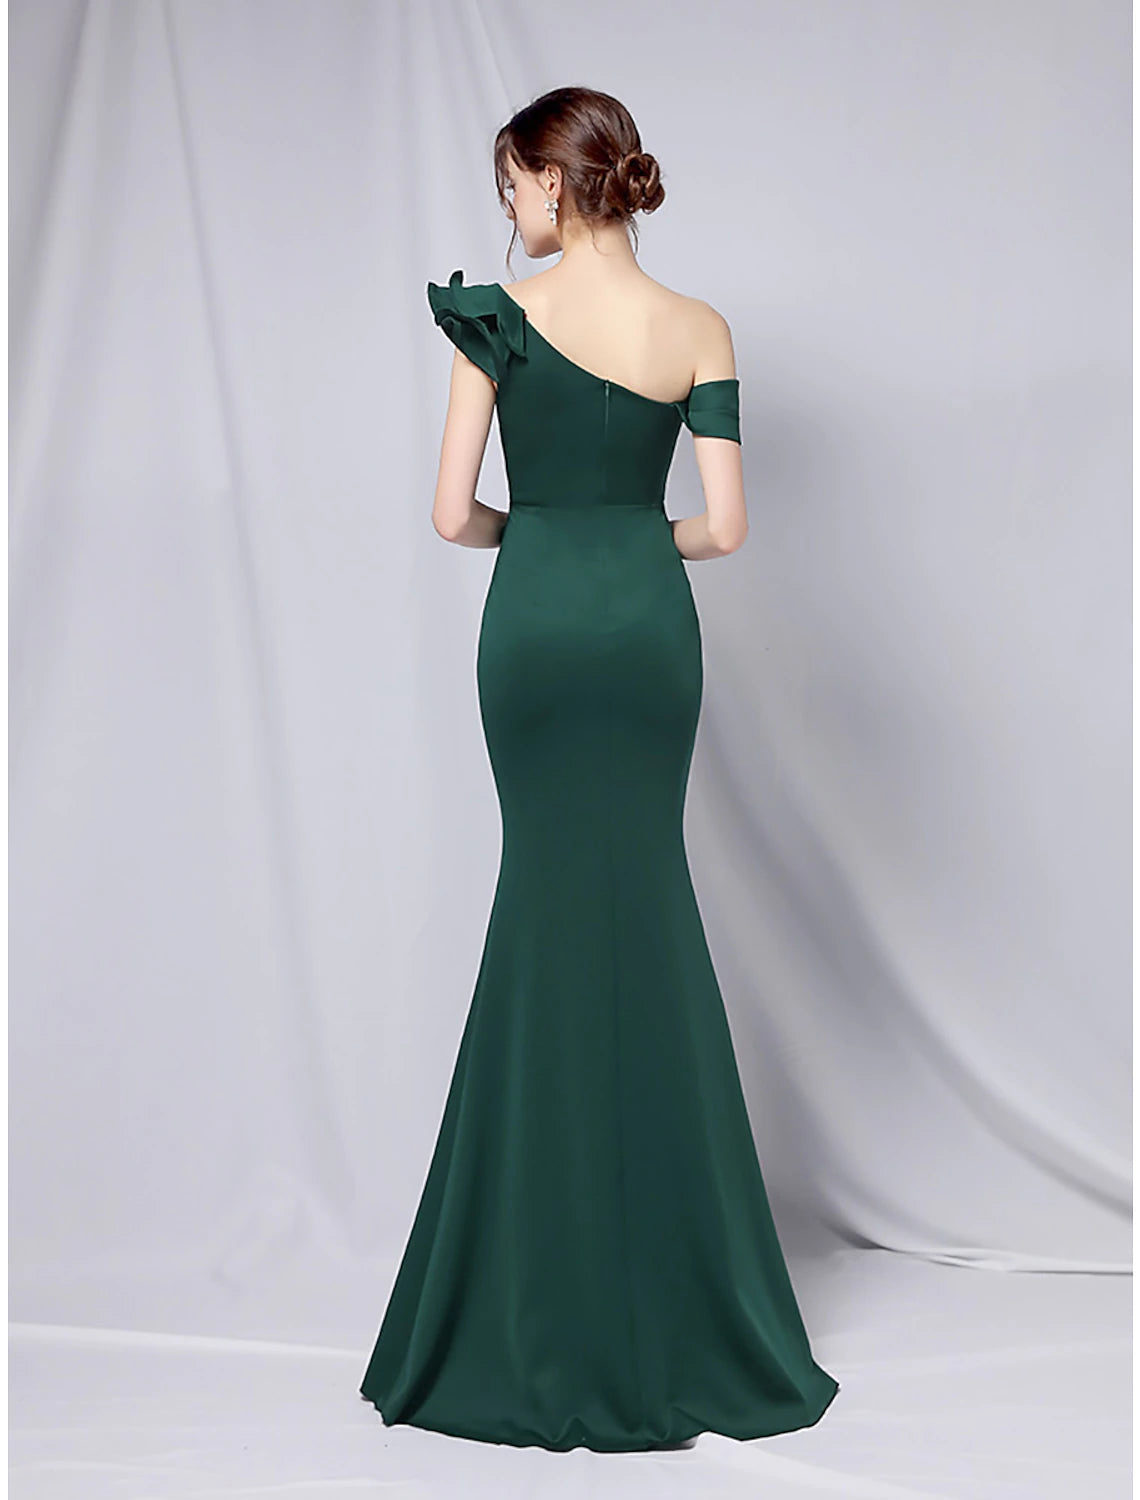 Mermaid / Trumpet Evening Gown Empire Dress Wedding Guest Formal Evening Floor Length Short Sleeve One Shoulder Stretch Satin with Ruffles